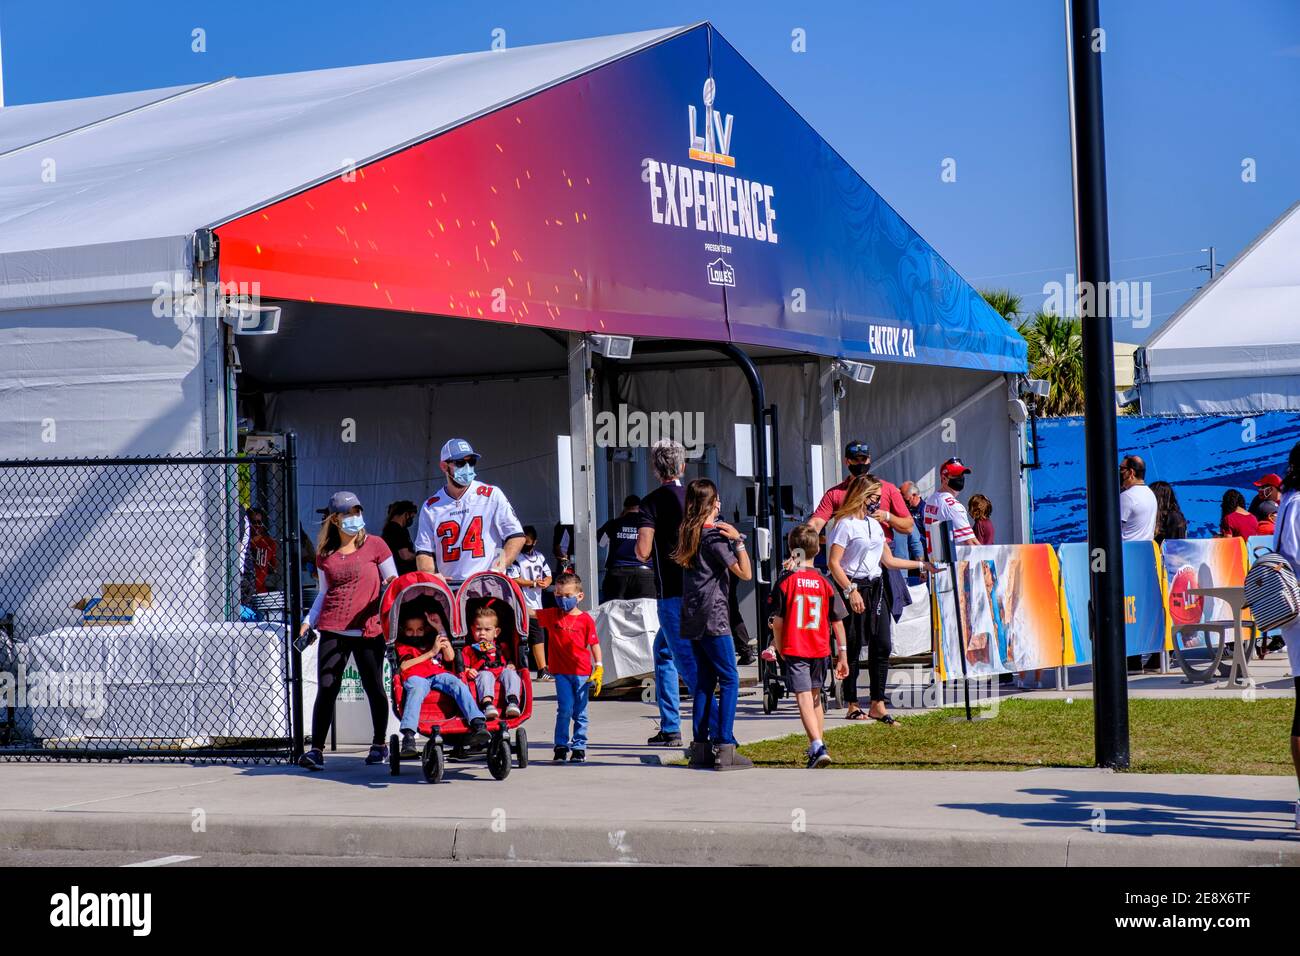 People exiting security checkpoint at the NFL Experience - Super Bowl LV (55) Tampa, Florida- Super Bowl LV (55) Tampa, Florida Stock Photo